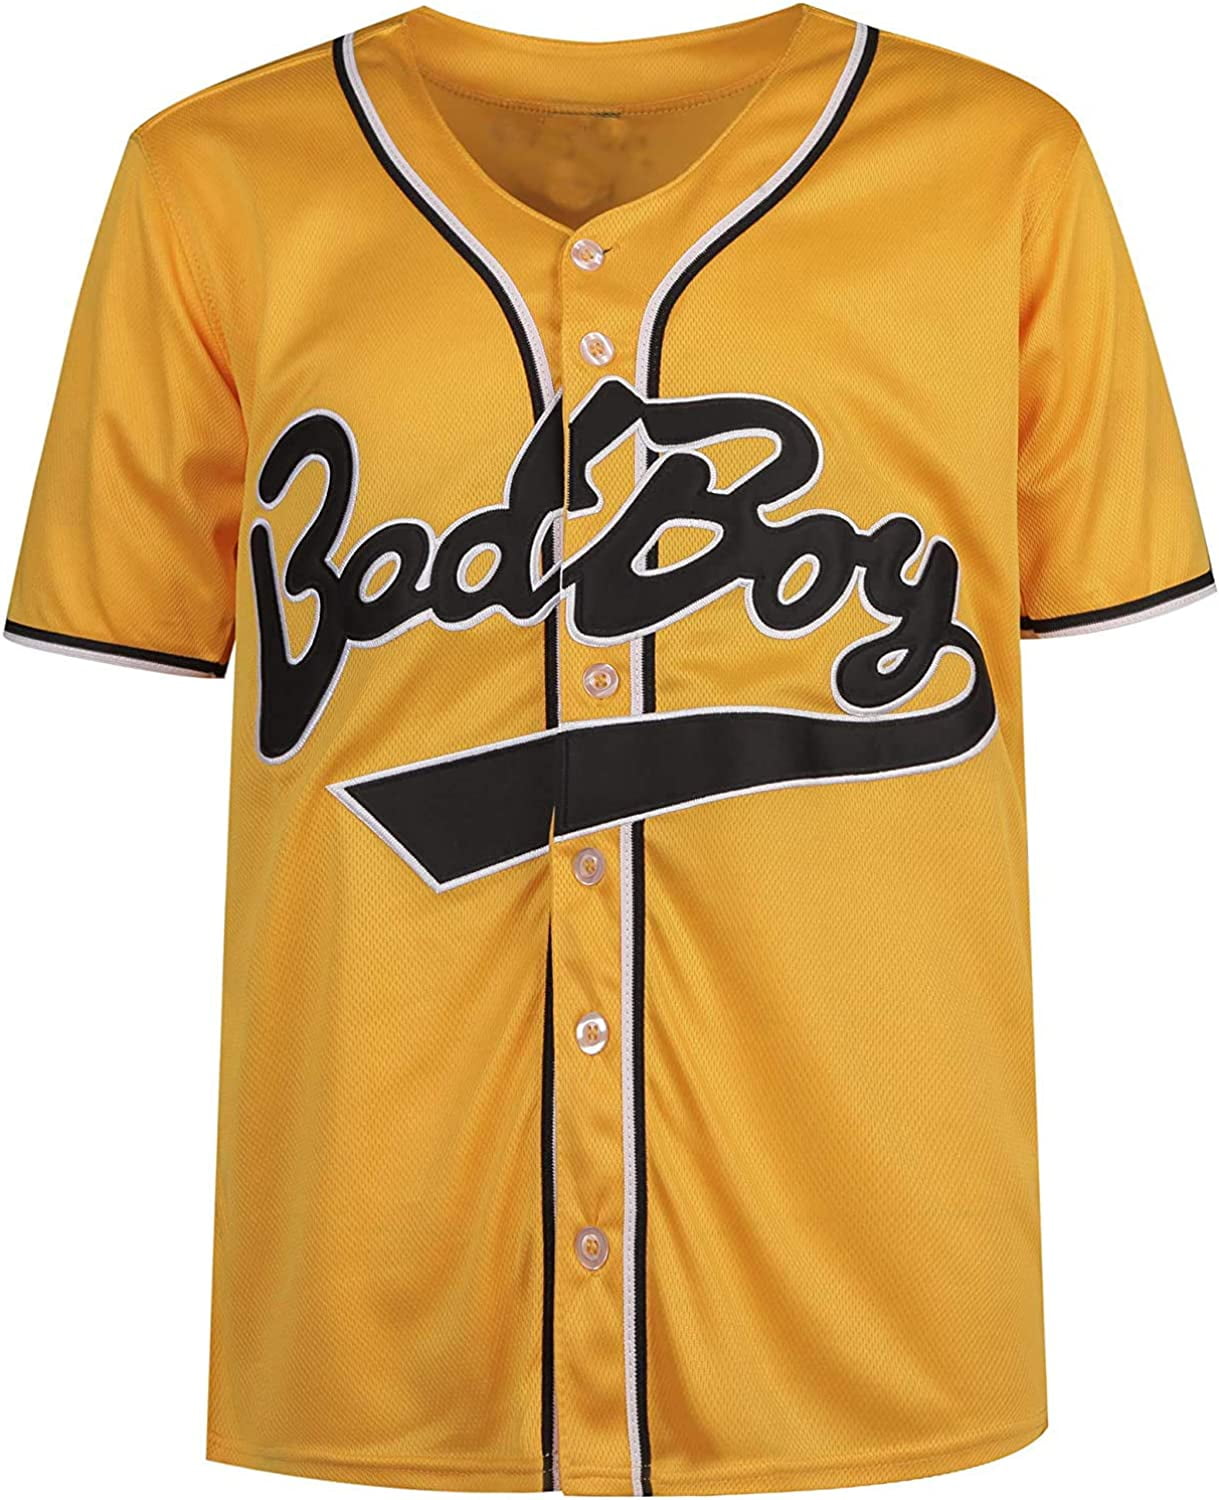 Acail #10 Biggie Bad Boy Movie Baseball Jersey Stitched 90s Hip Hop Unisex Clothing for Party Size S-XXXL